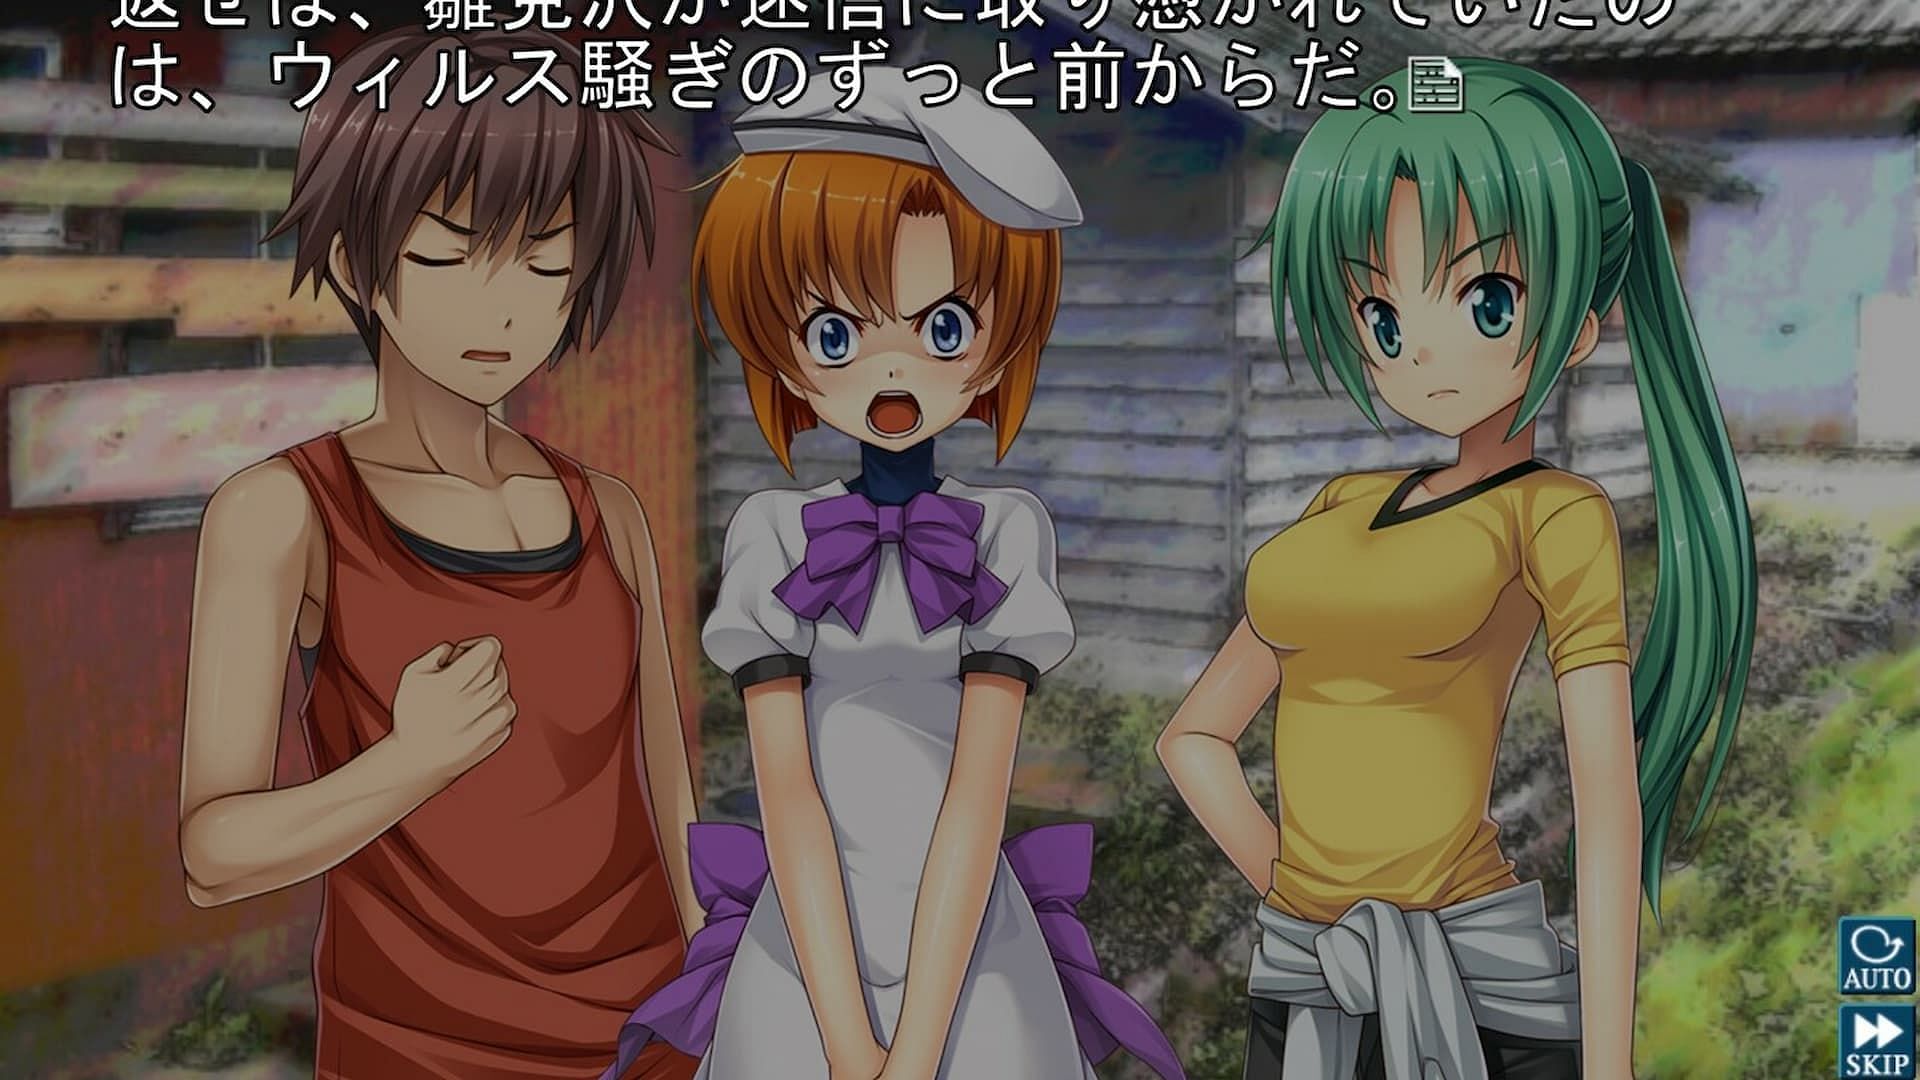 Higurashi When They Cry Huo is a grisly tale of paranoia and despair (Image via MangaGamer)